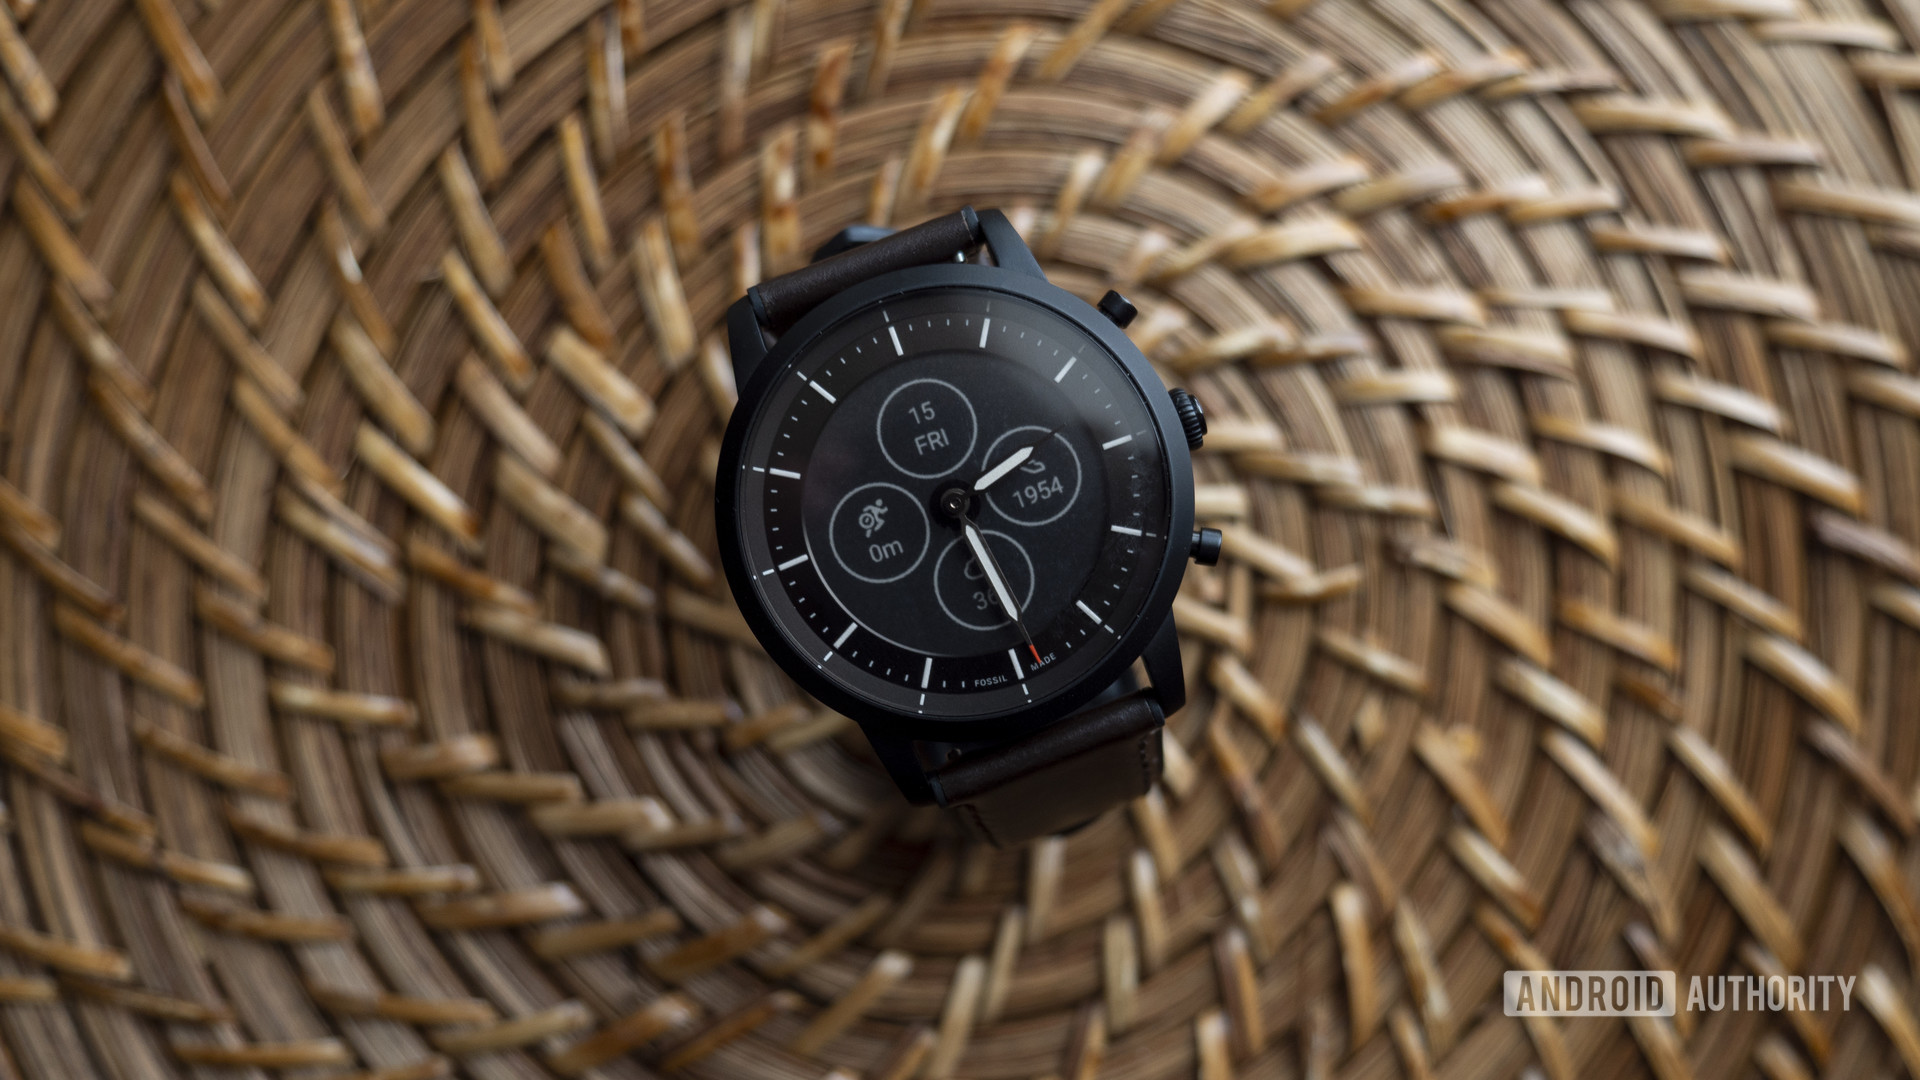 Senatet Udholdenhed civilisere Fossil Hybrid HR review: A beautifully flawed smartwatch